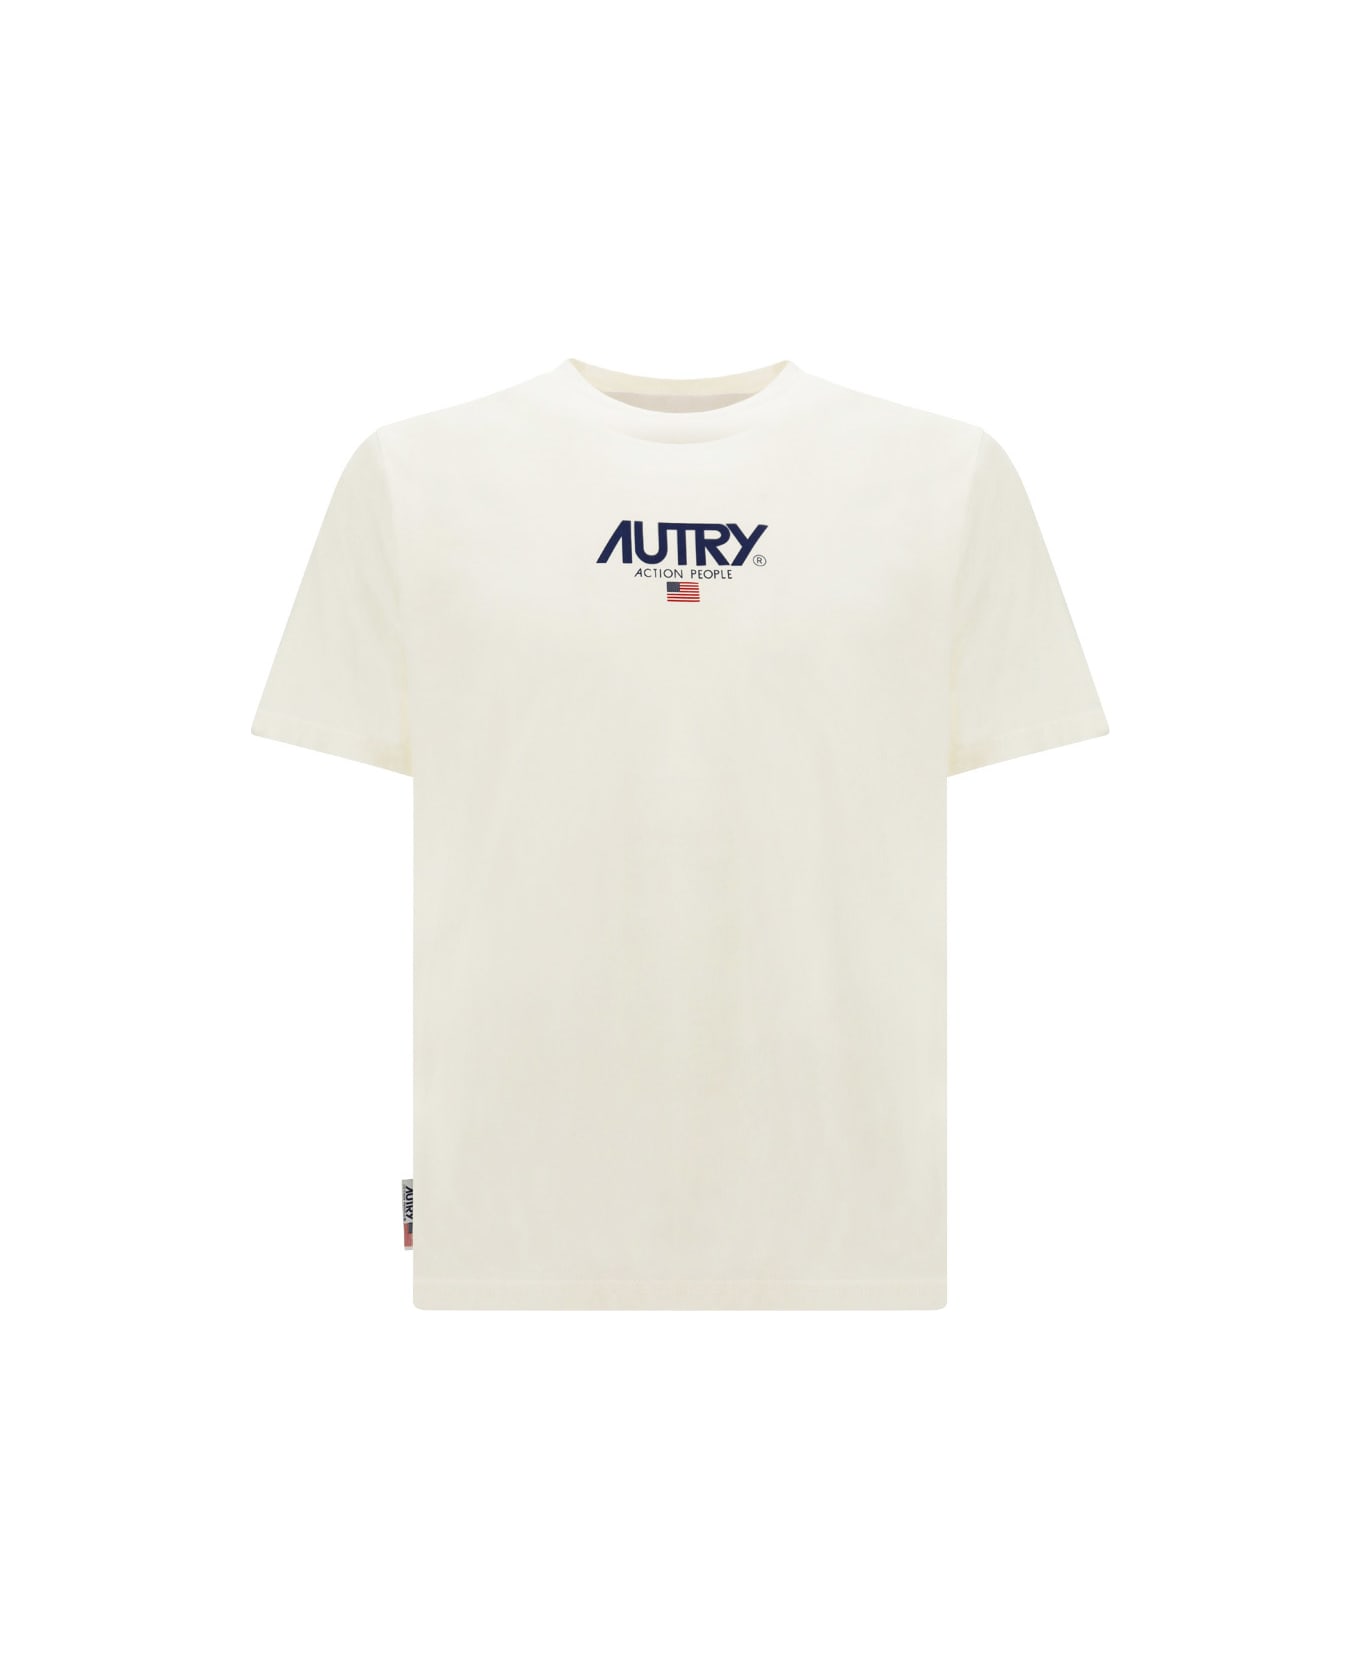 Autry Iconic Action T-shirt - Off White